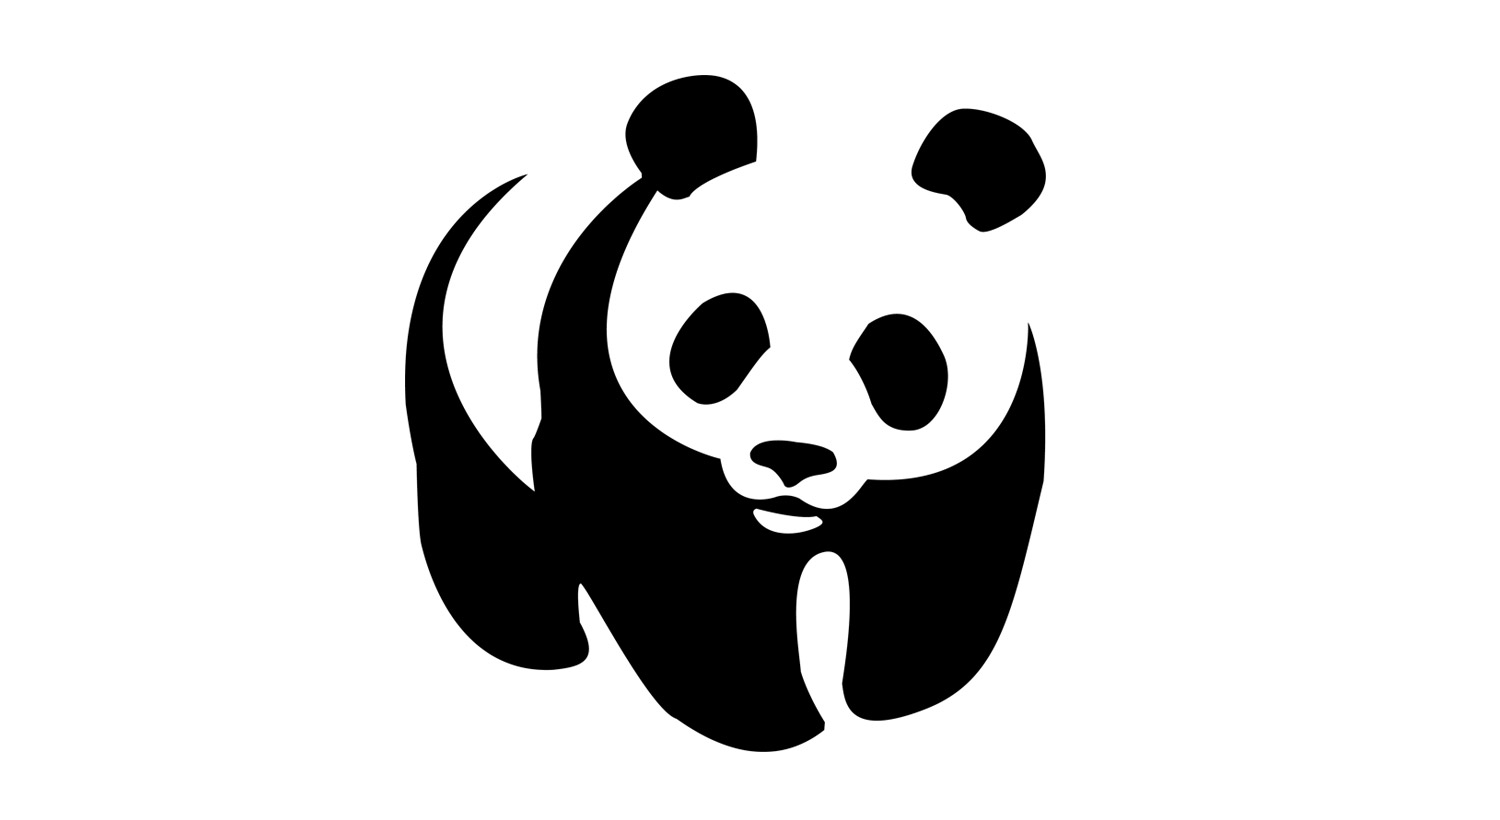 Clever use of gestalt priciple 'closure' in the WWF panda icon